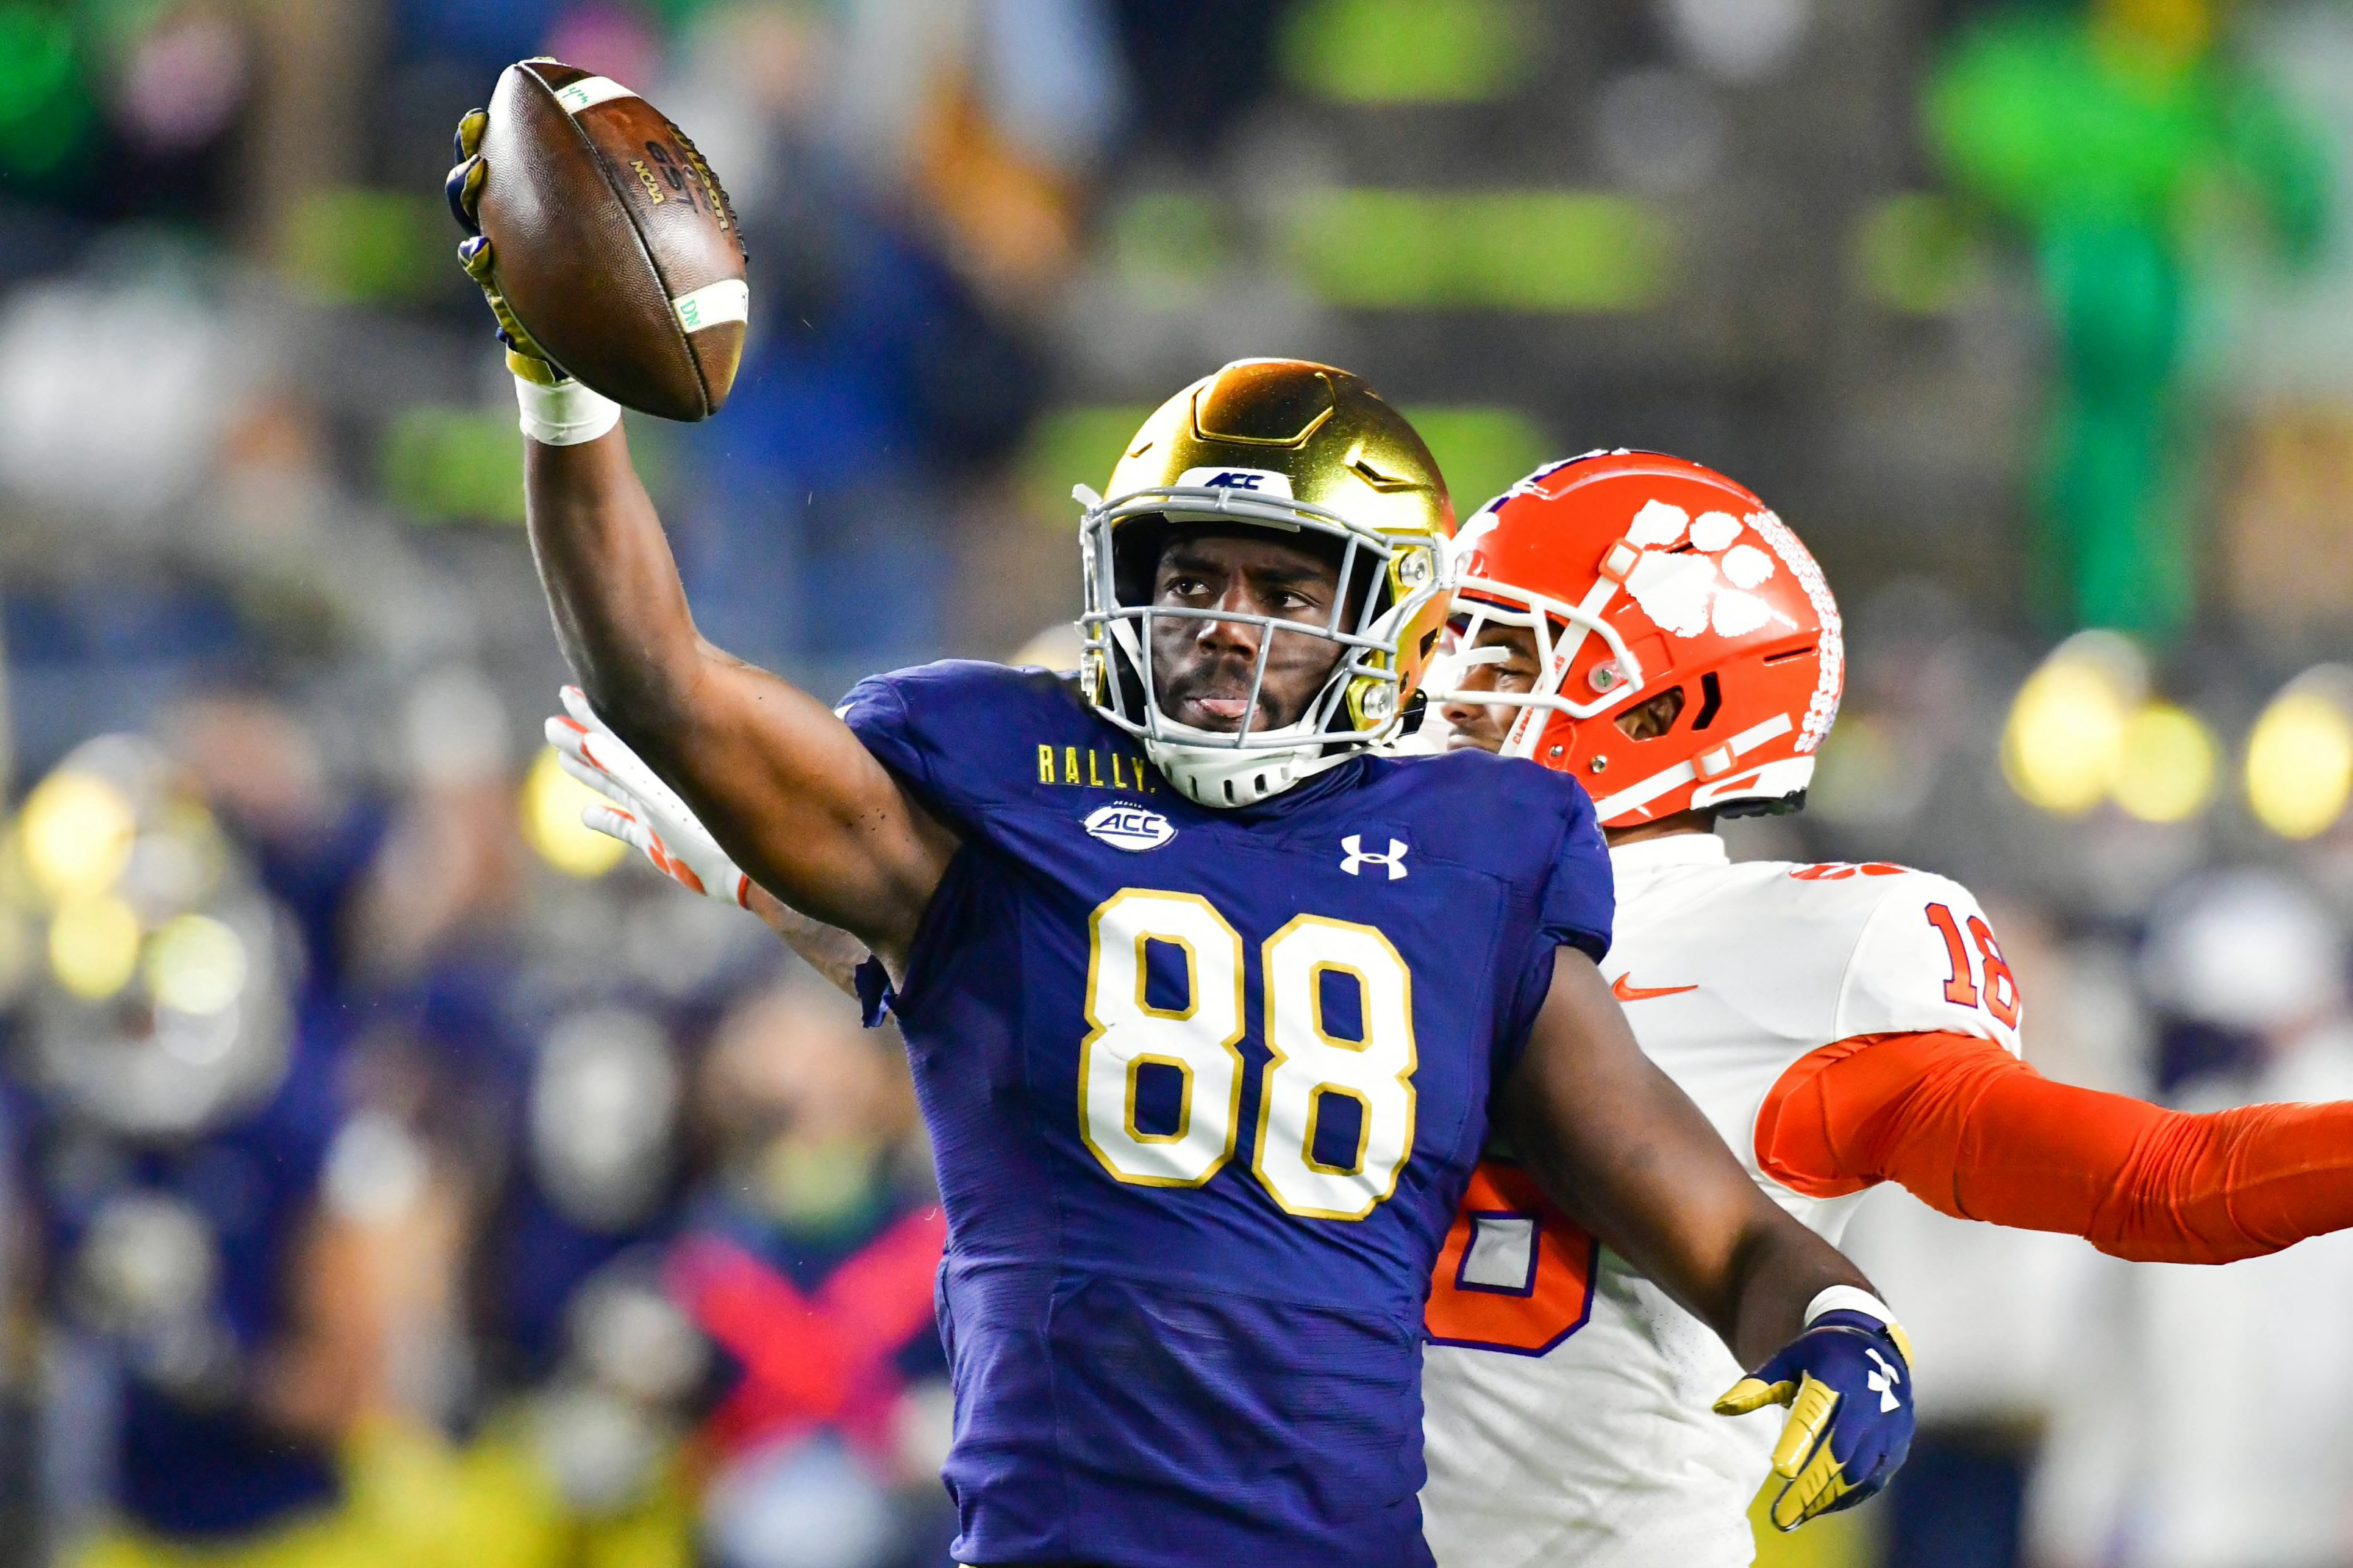 Notre Dame Football vs. Clemson Tigers Preview and Prediction